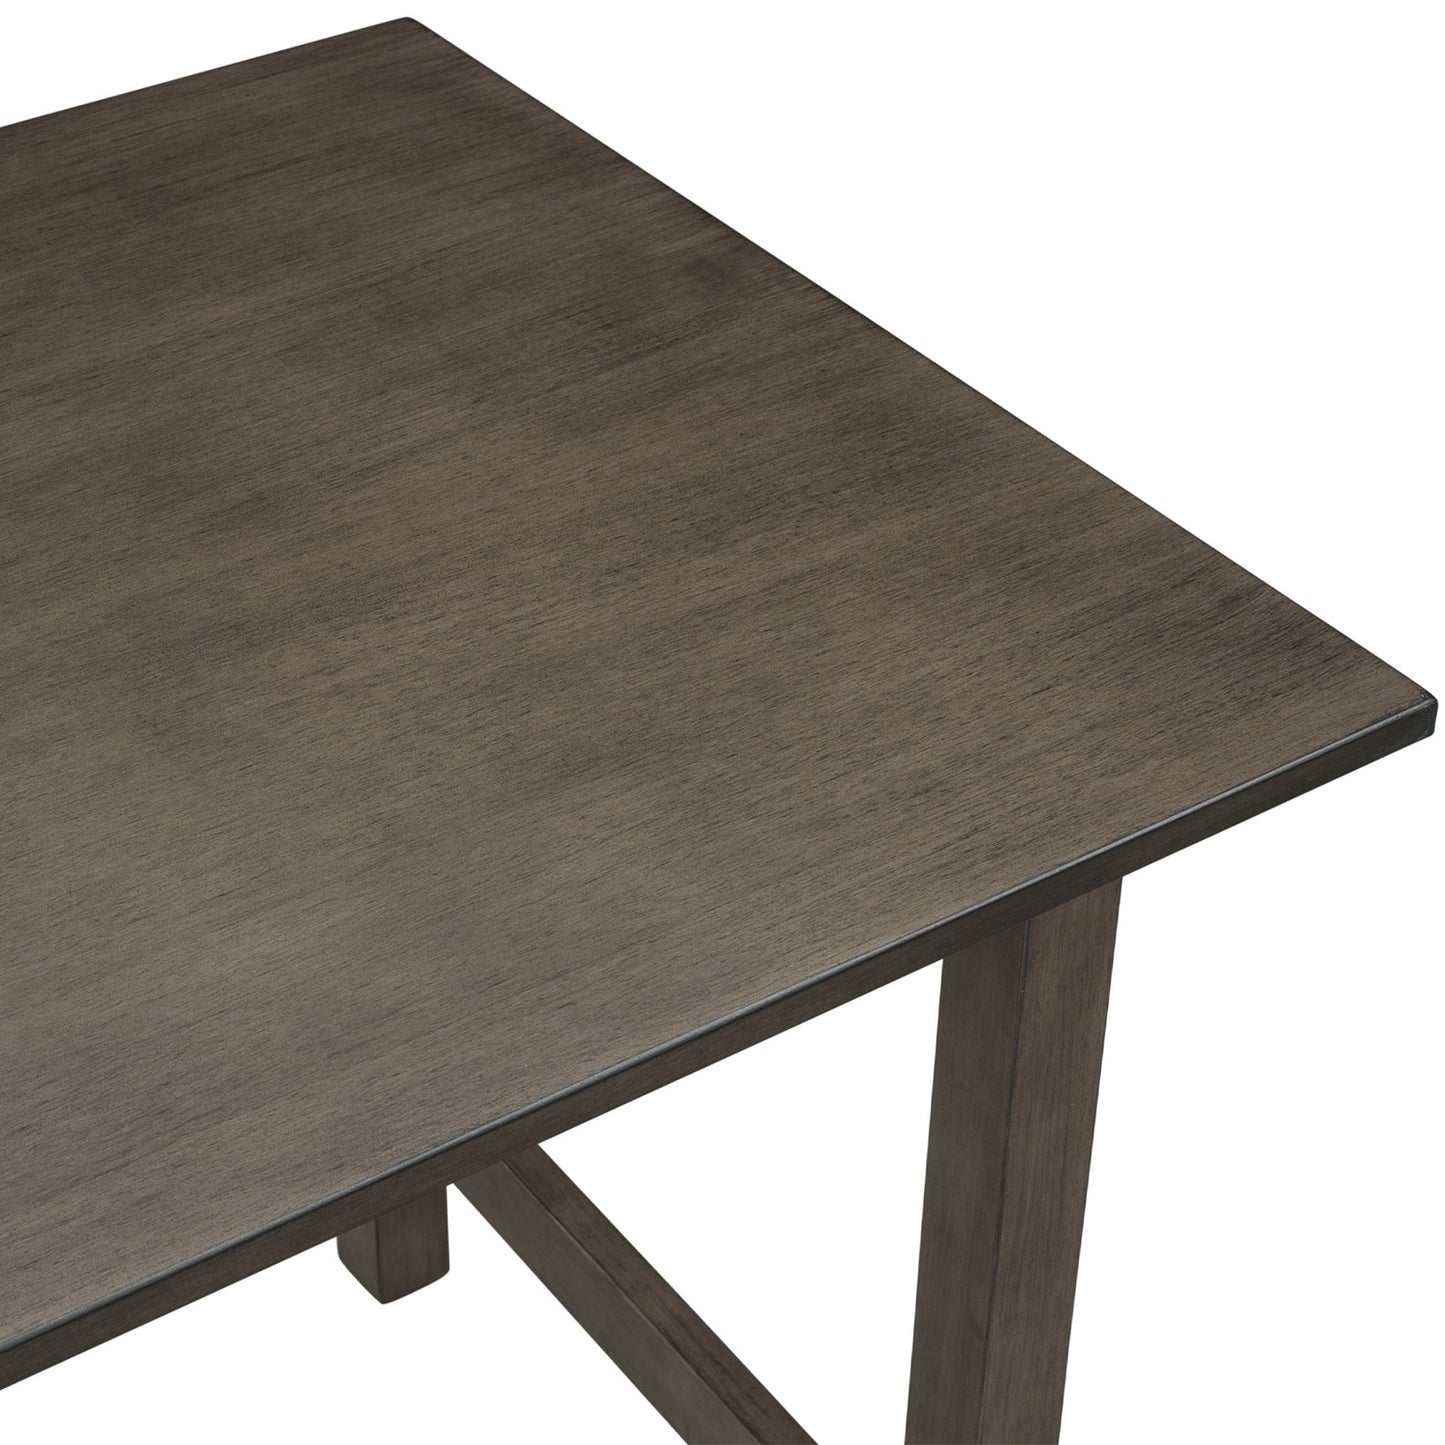 1st Choice Modern Farmhouse Wood Dining Table for 4 Kitchen Table